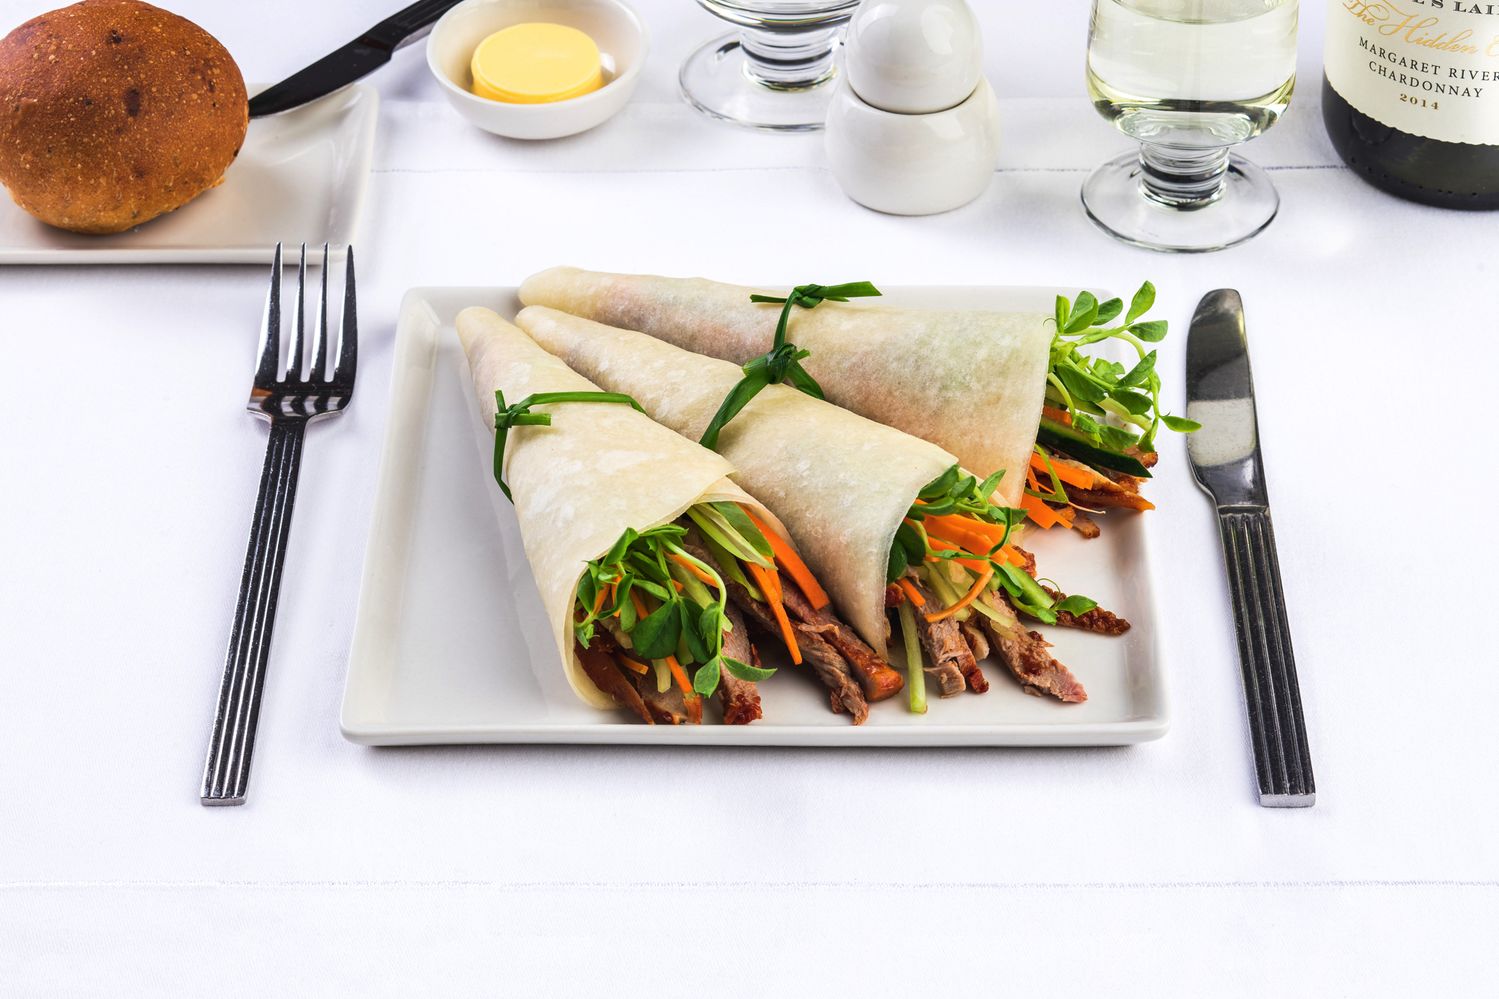 Peking duck pancakes with Hoisin sauce: locally-sourced duck is roasted and thinly sliced, with spring onion, snow pea sprouts and thinly-sliced carrot, wrapped in a traditional Chinese pancake. Served with Hoisin sauce.